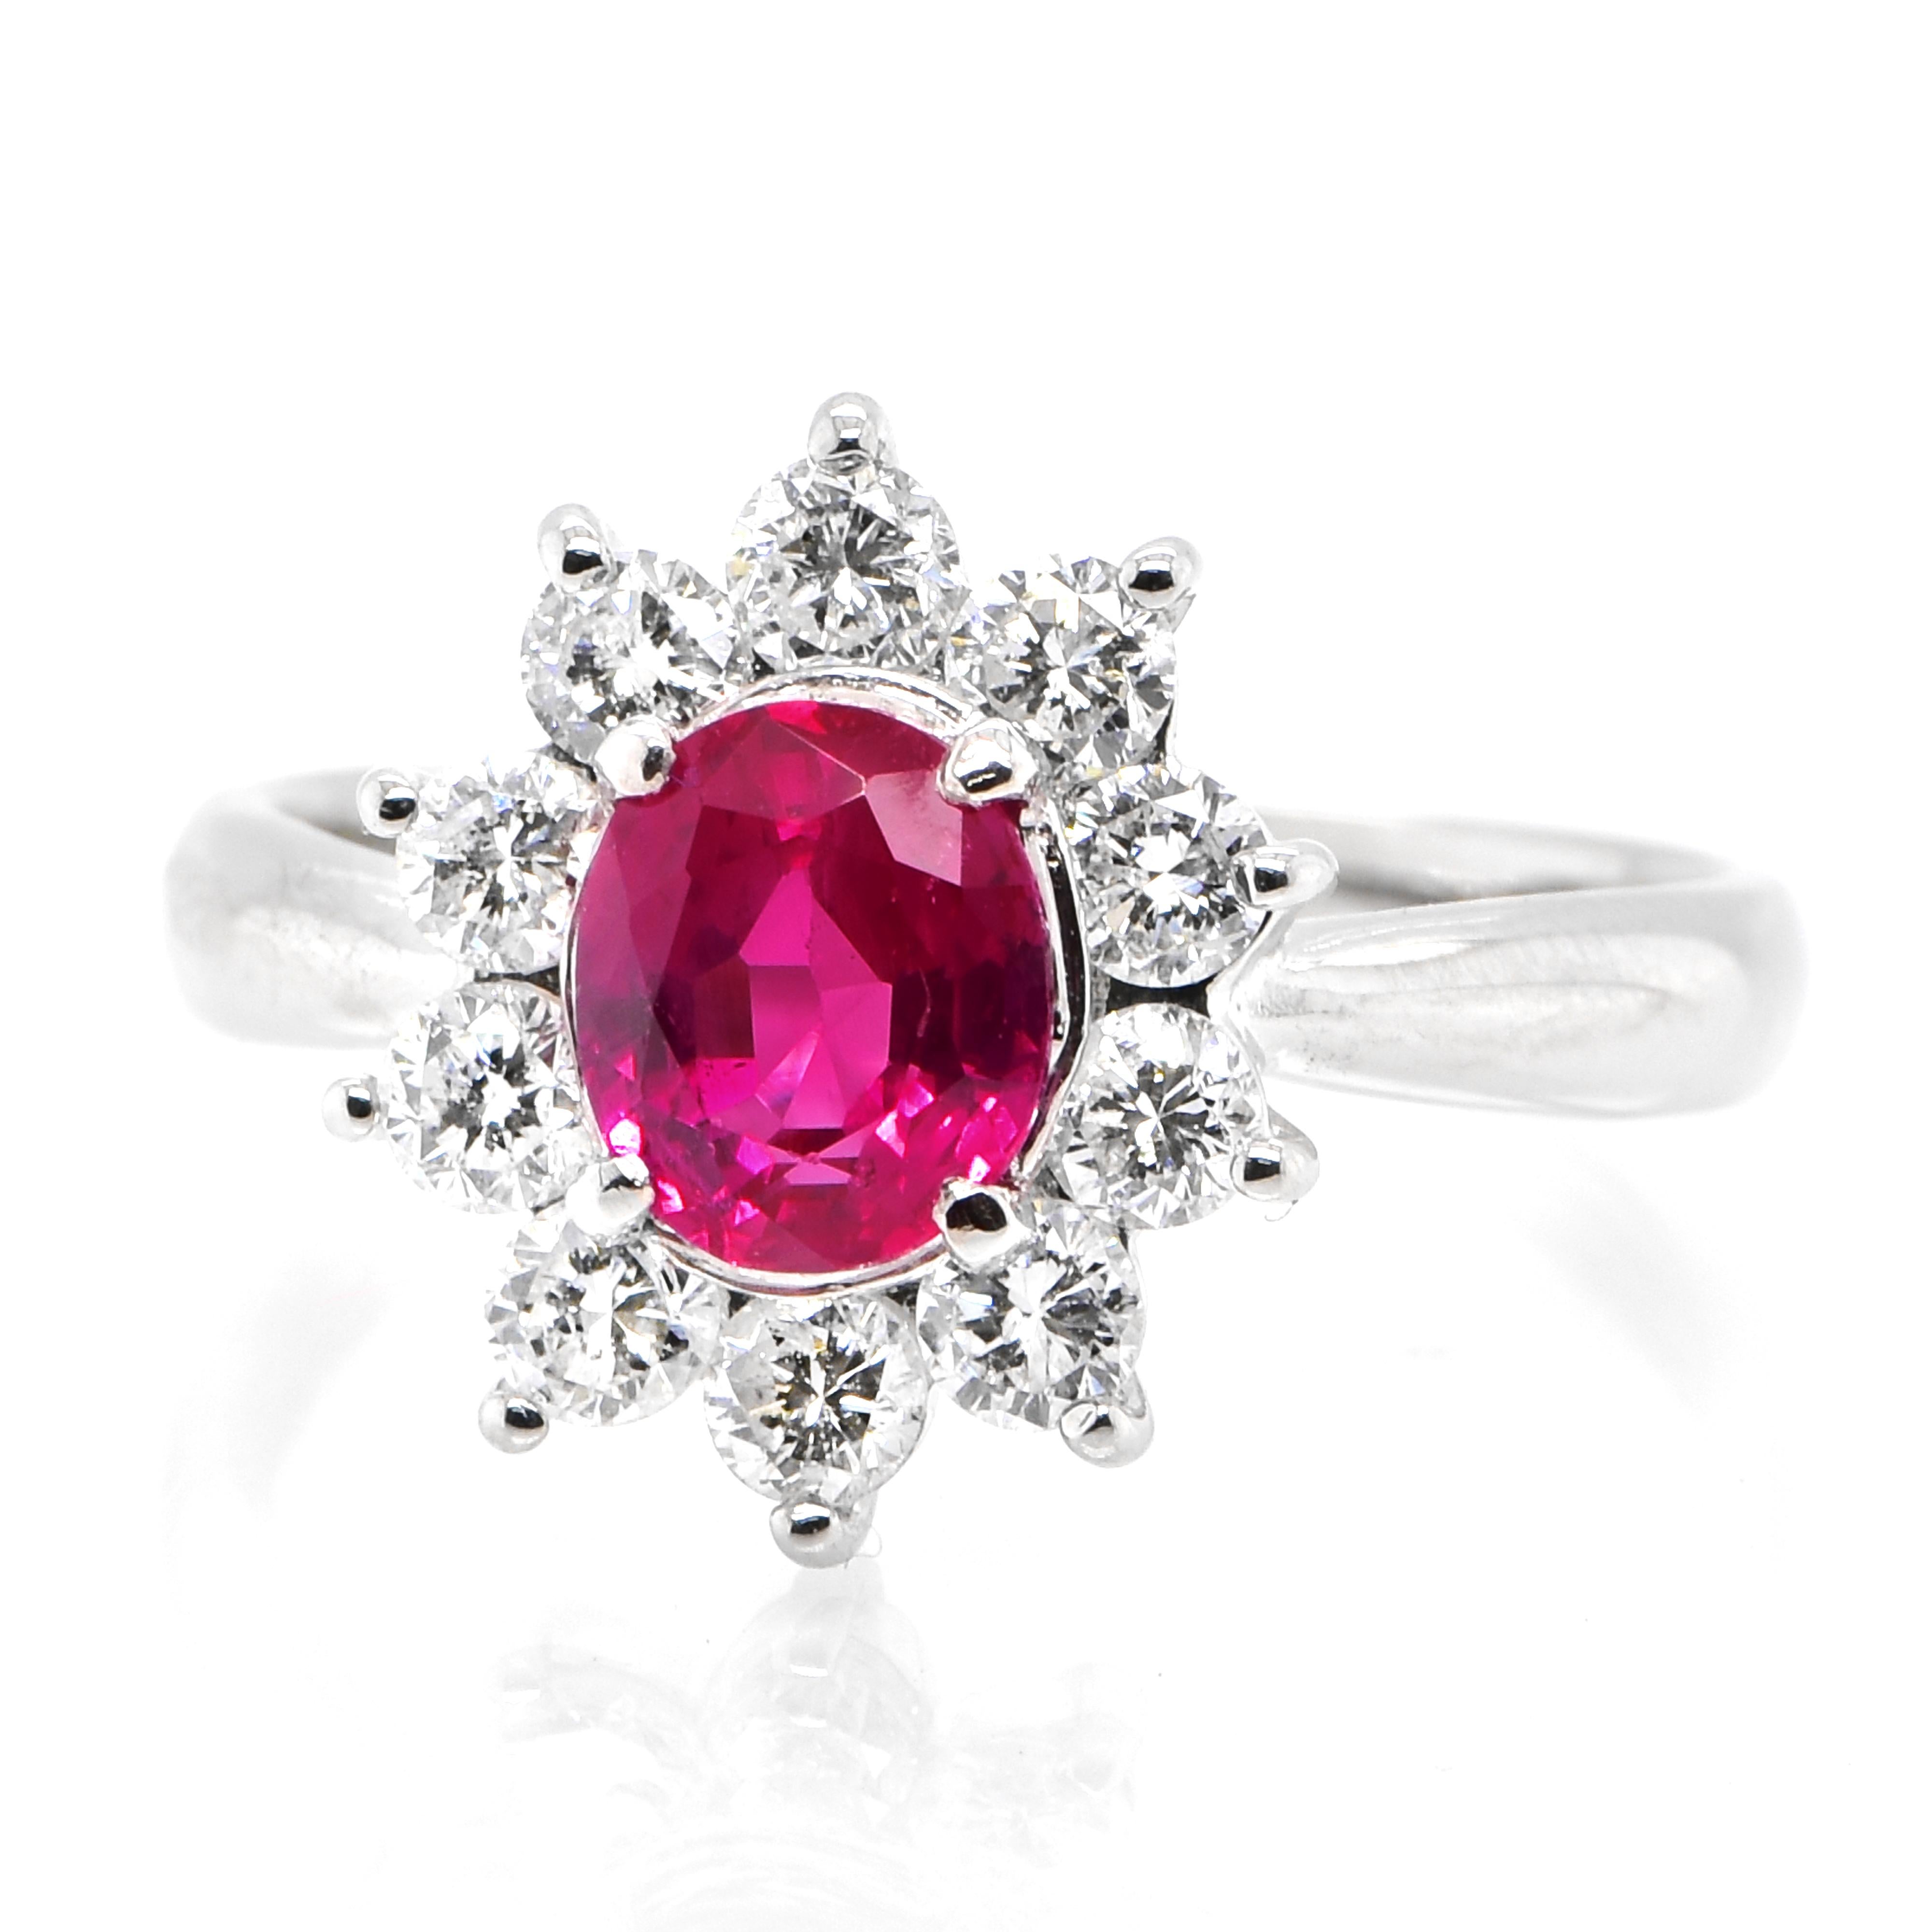 A beautiful Ring set in Platinum featuring a GIA Certified 1.19 Carat Natural, Untreated (No Heat), Burmese Ruby and 0.71 Carat Diamonds. Rubies are referred to as 